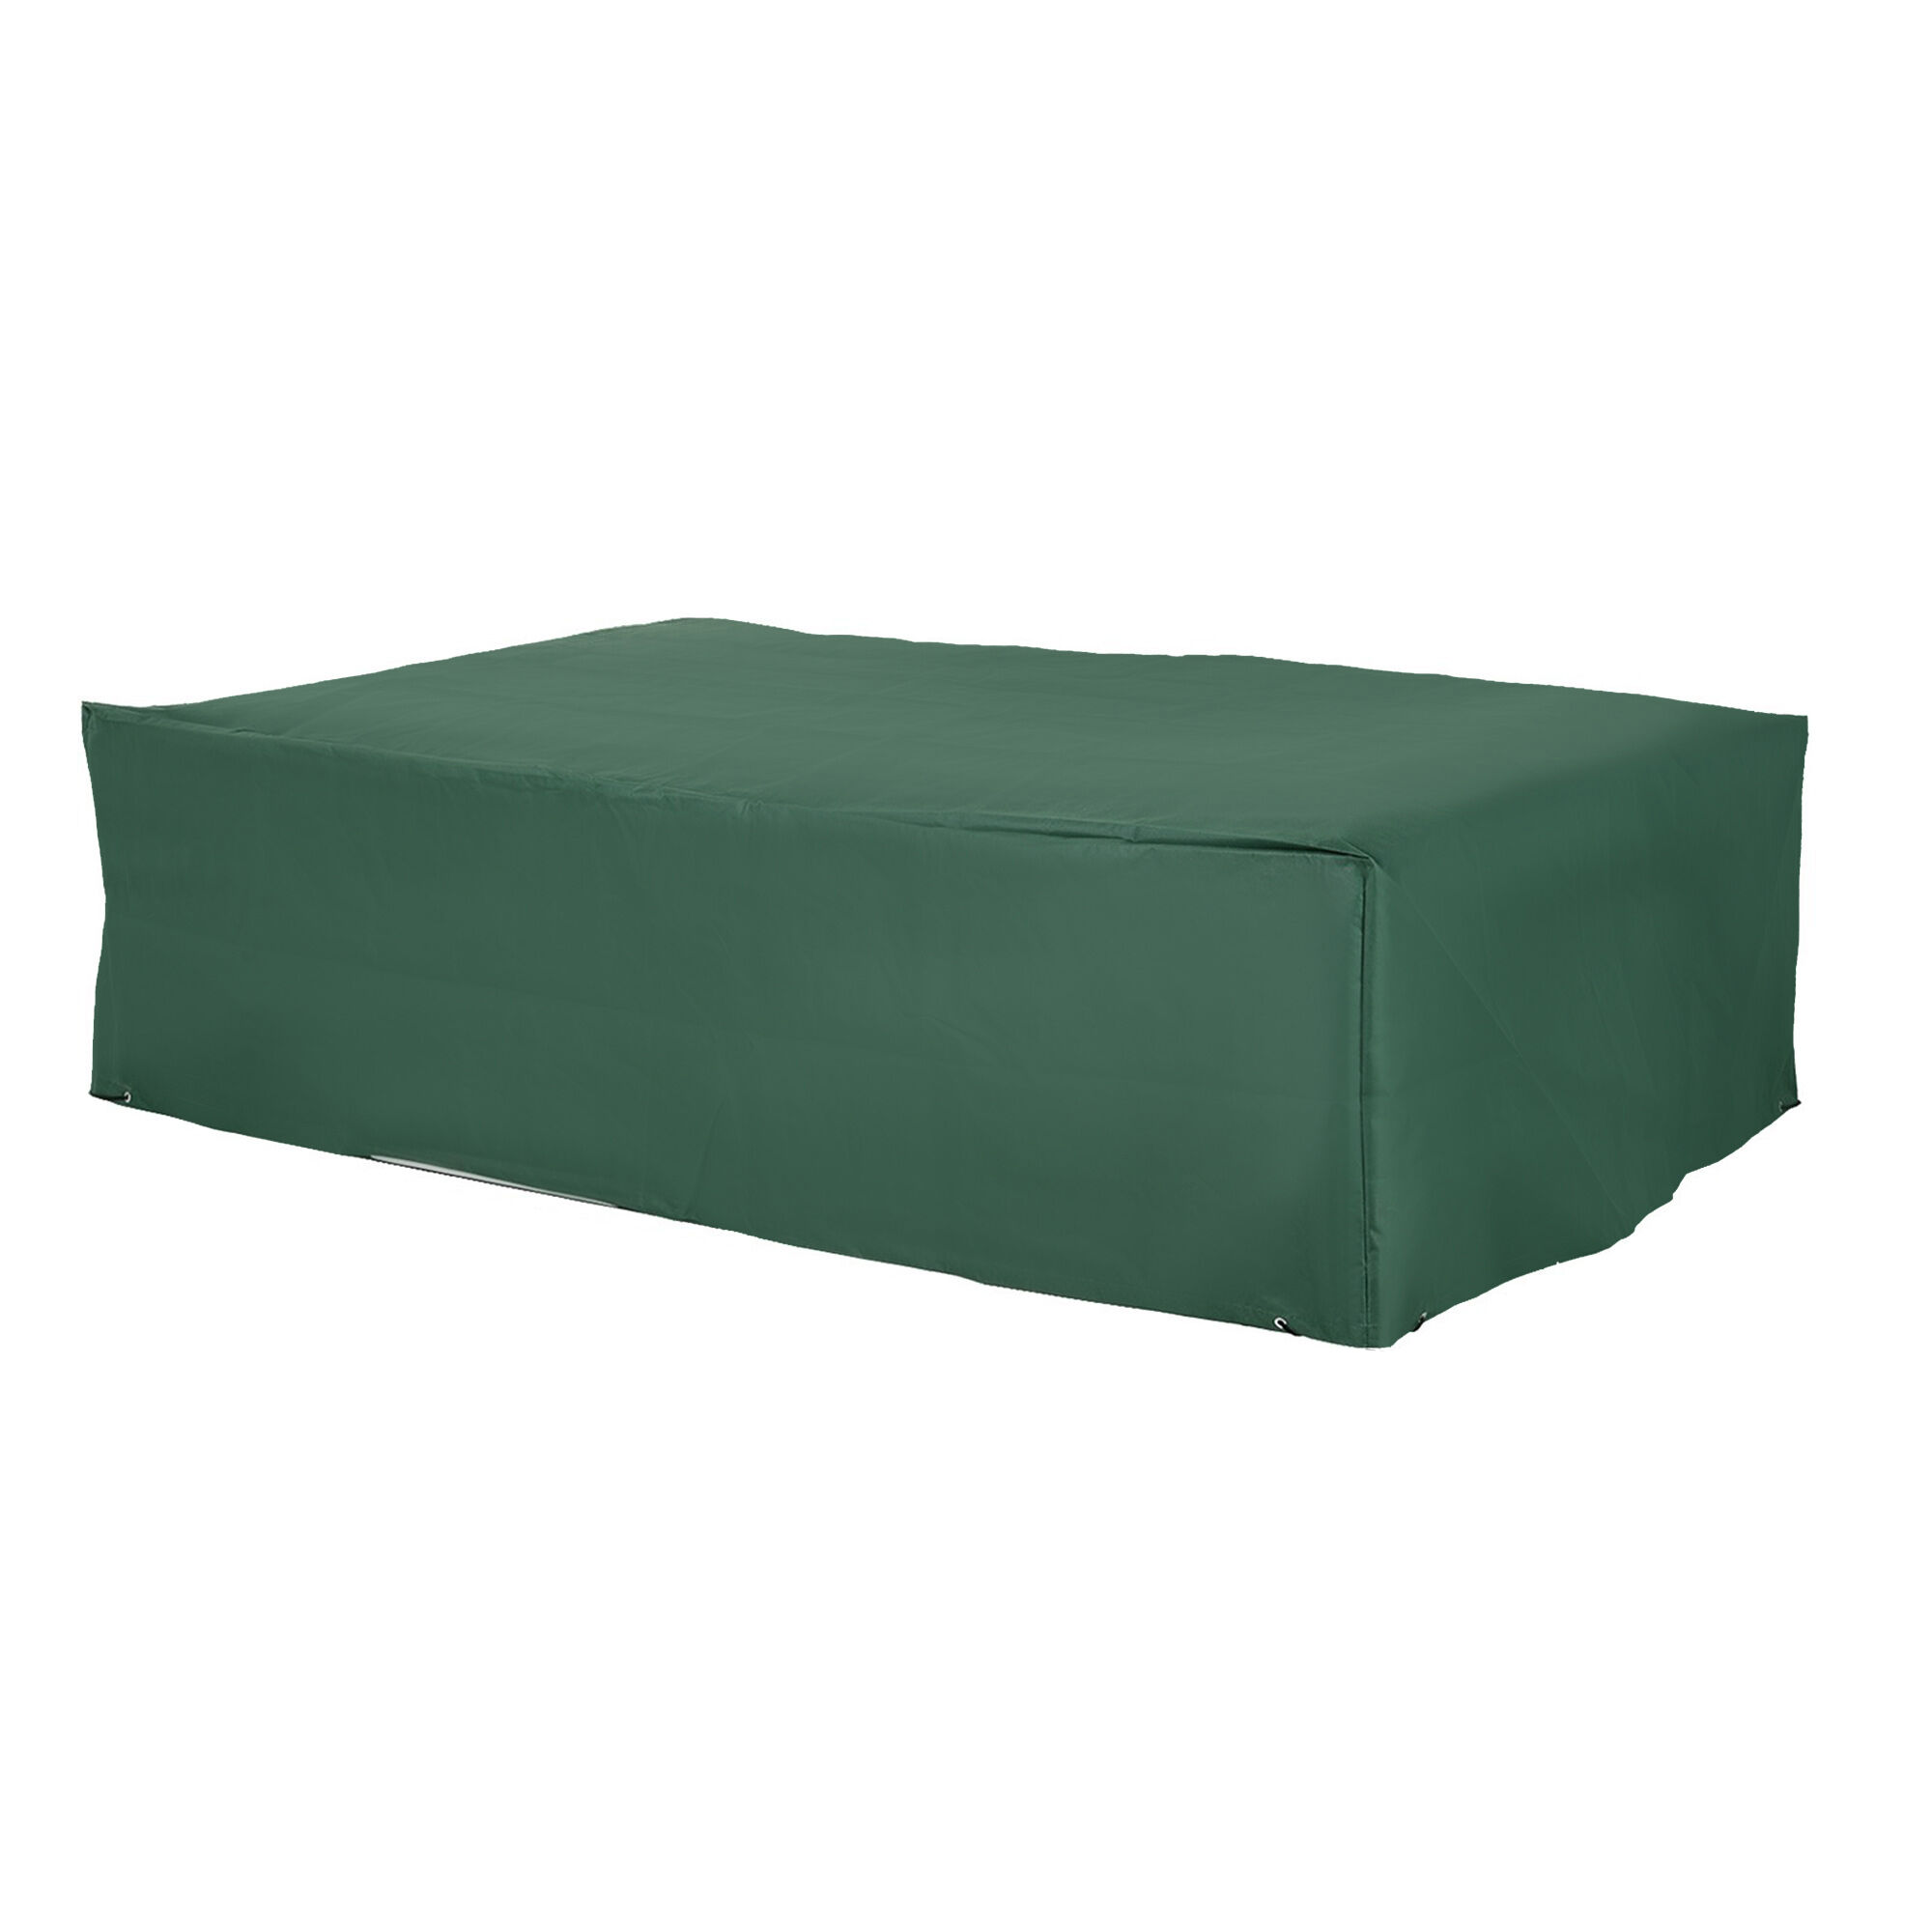 Outsunny 97"L x 65"W x 26"H Patio Sectional Lounge Set Furniture Sofa Cover, Heavy Duty Waterproof Outdoor Chair Cover, Dark Green